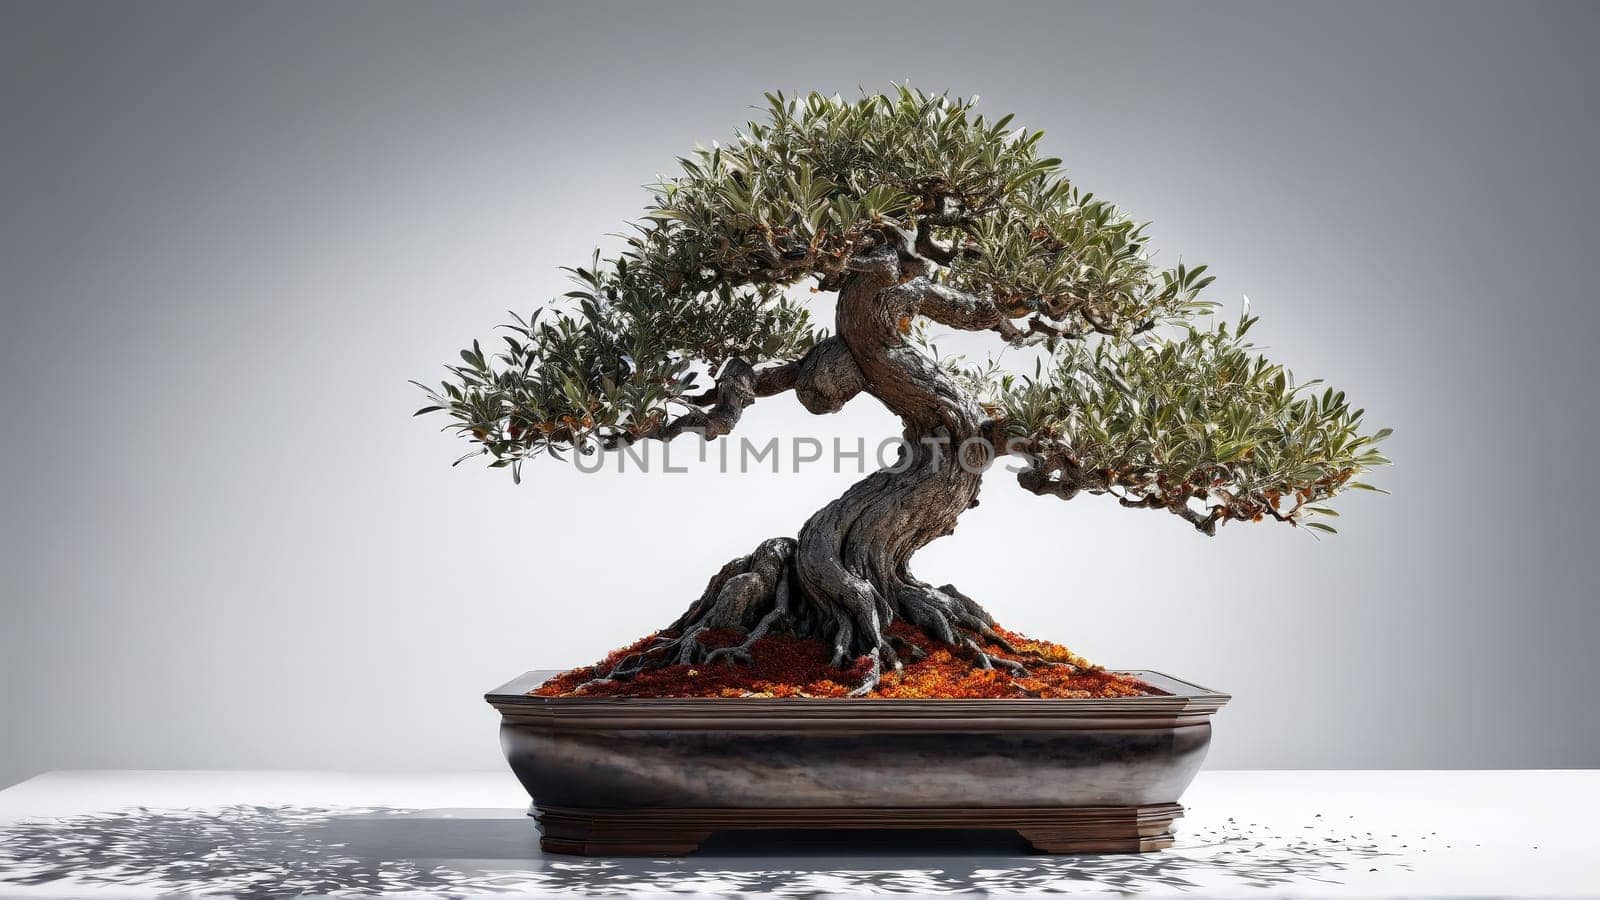 Rugged olive bonsai with fissured bark and silvery leaves crisp white strong shadows product by panophotograph